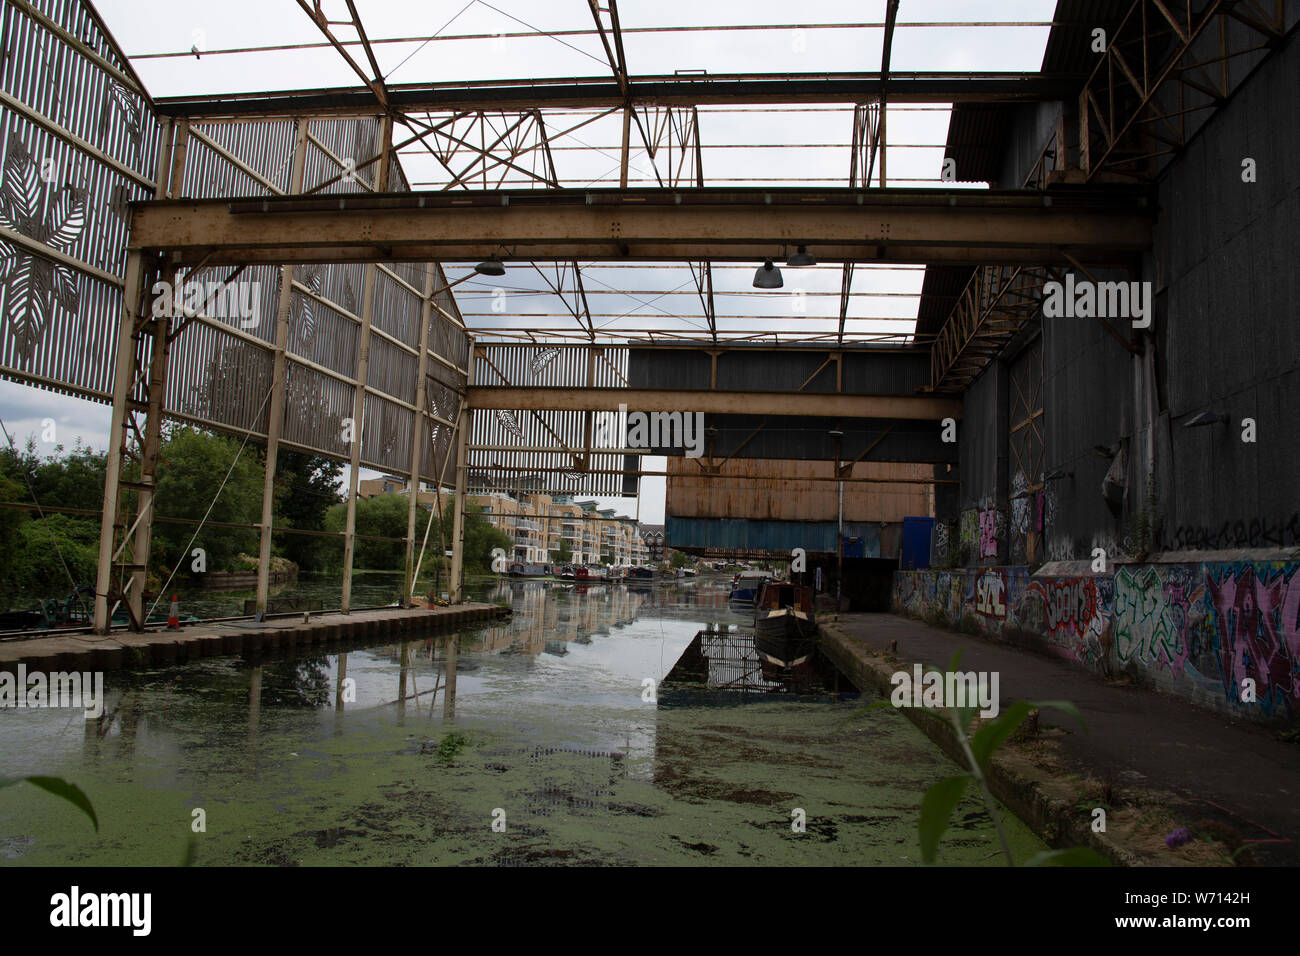 A derelict warehouse on the Grand Union Canal with new developments of flats and apartment blocks in the background, Brentford, London, Middlesex UK Stock Photo